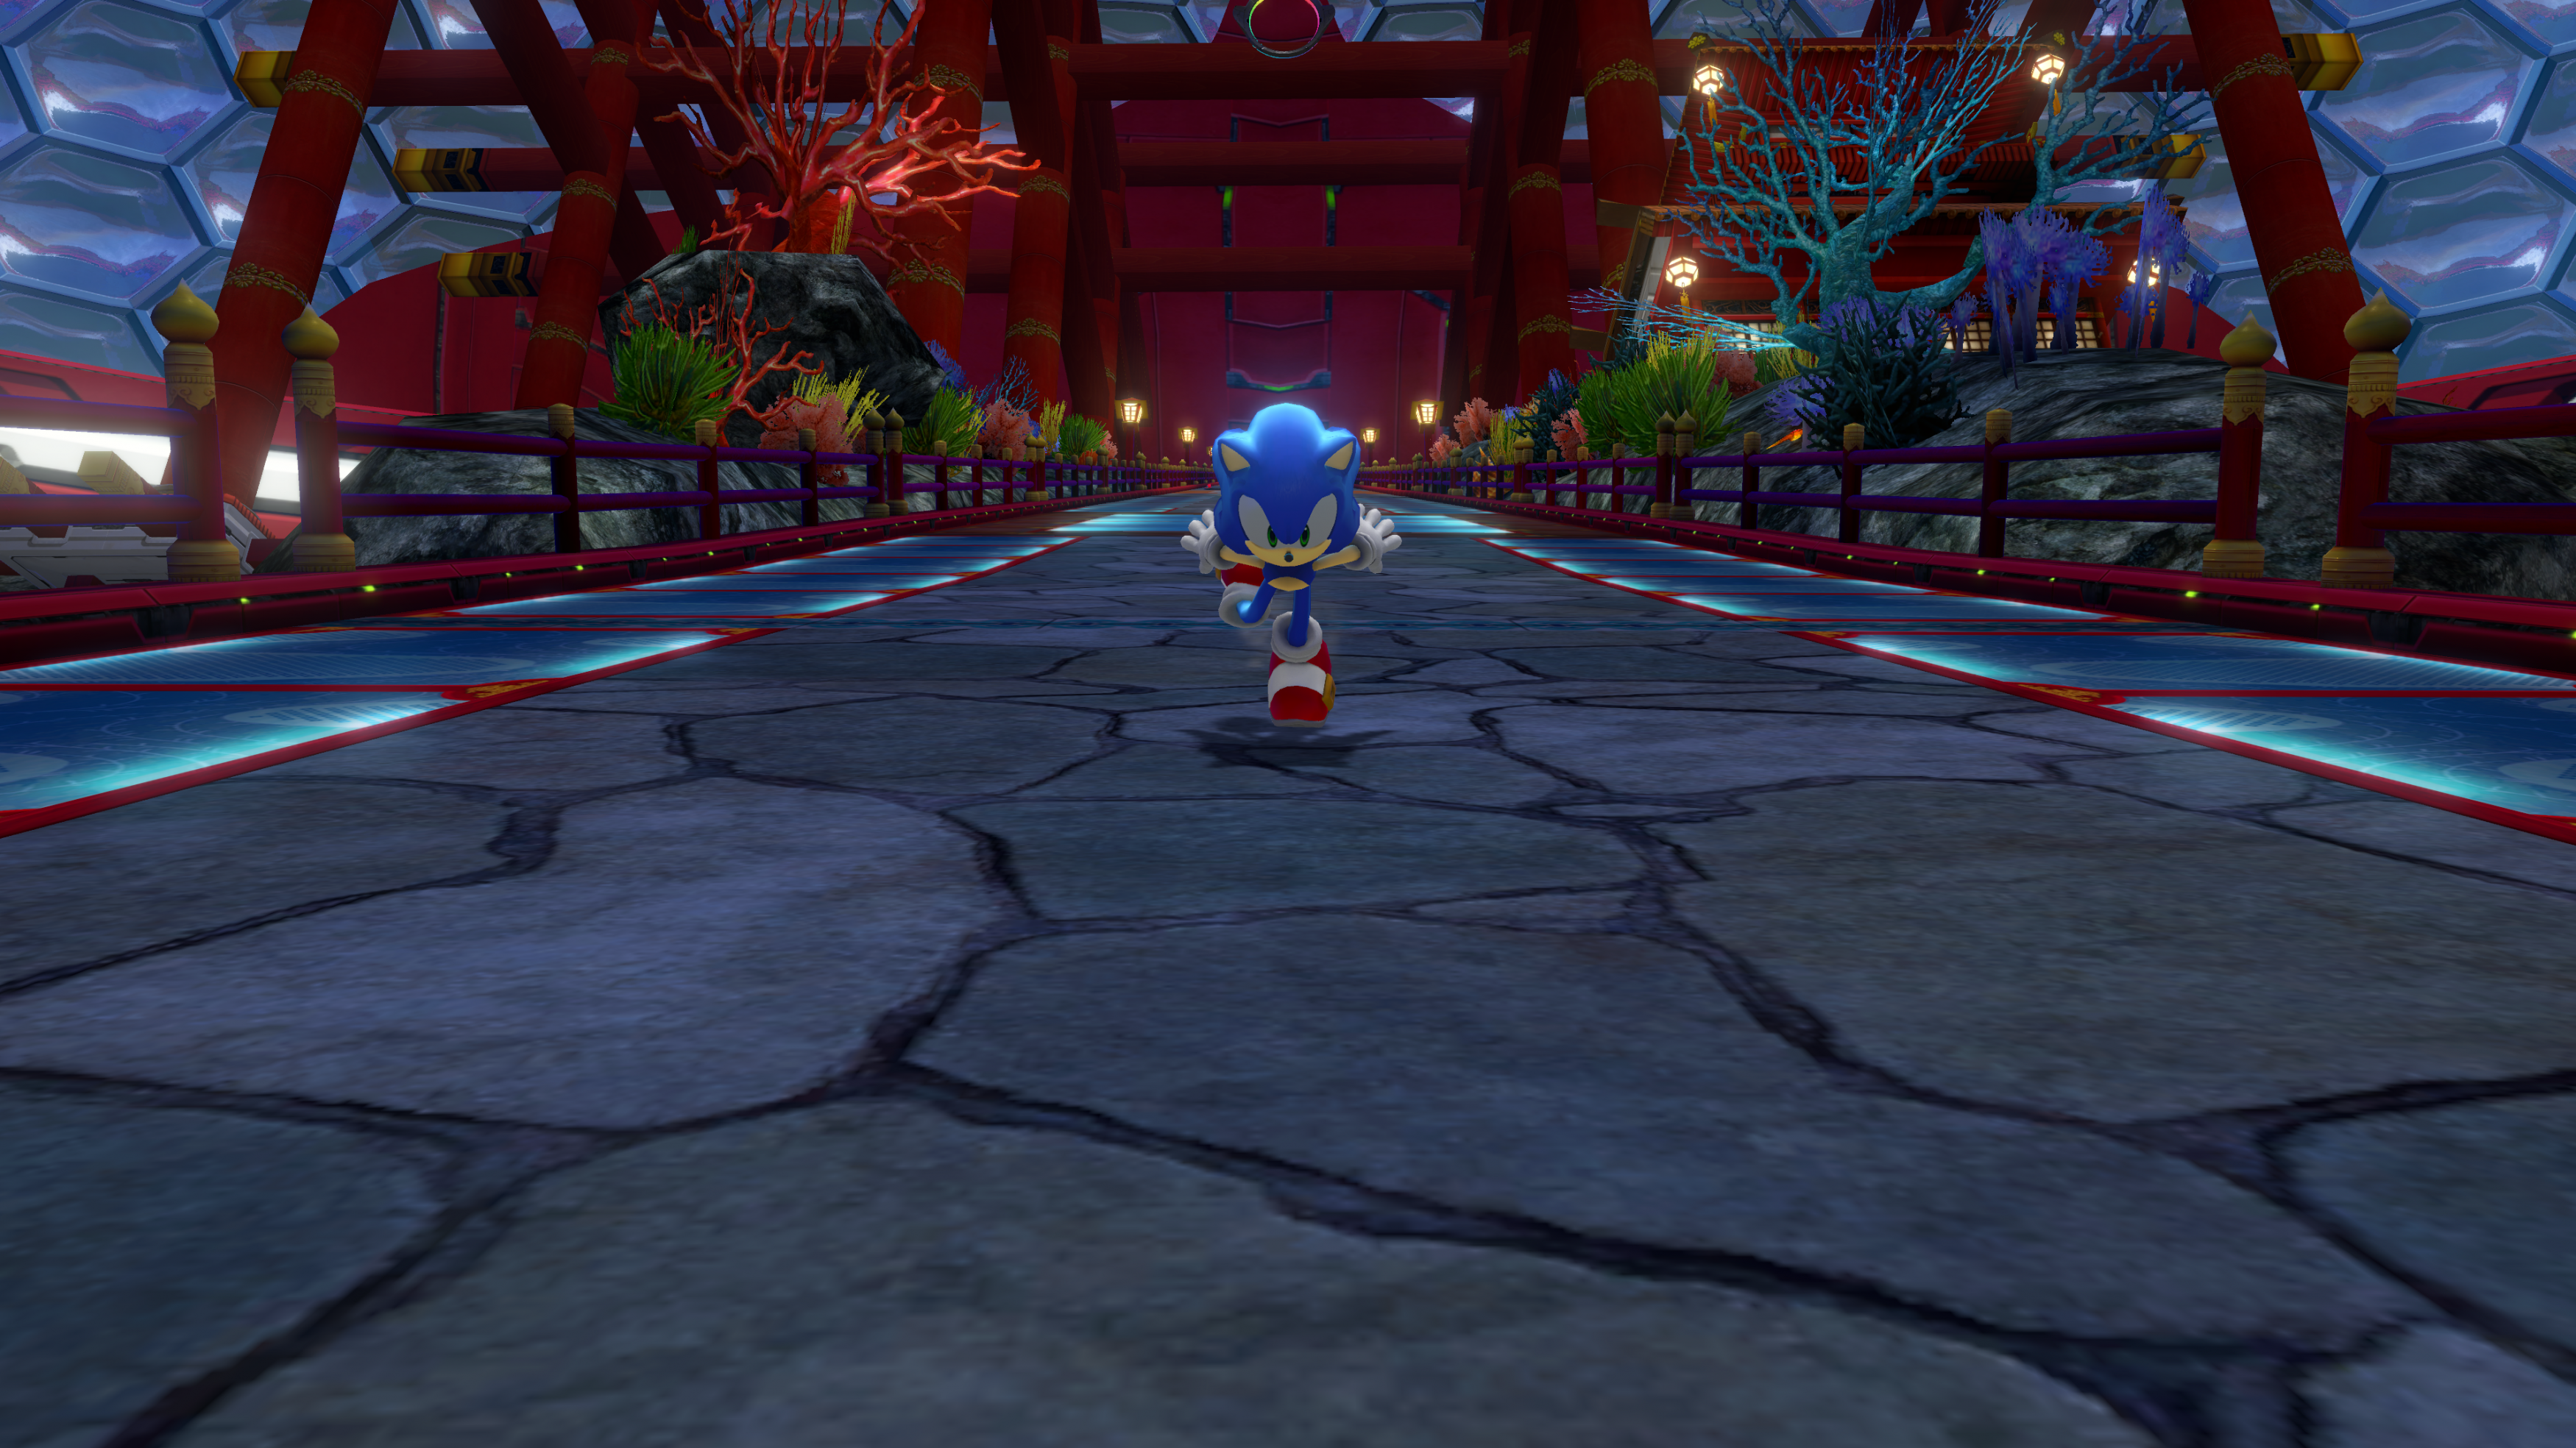 Review: No-Nonsense Sonic Colors Is Best Hedgehog Game in Years